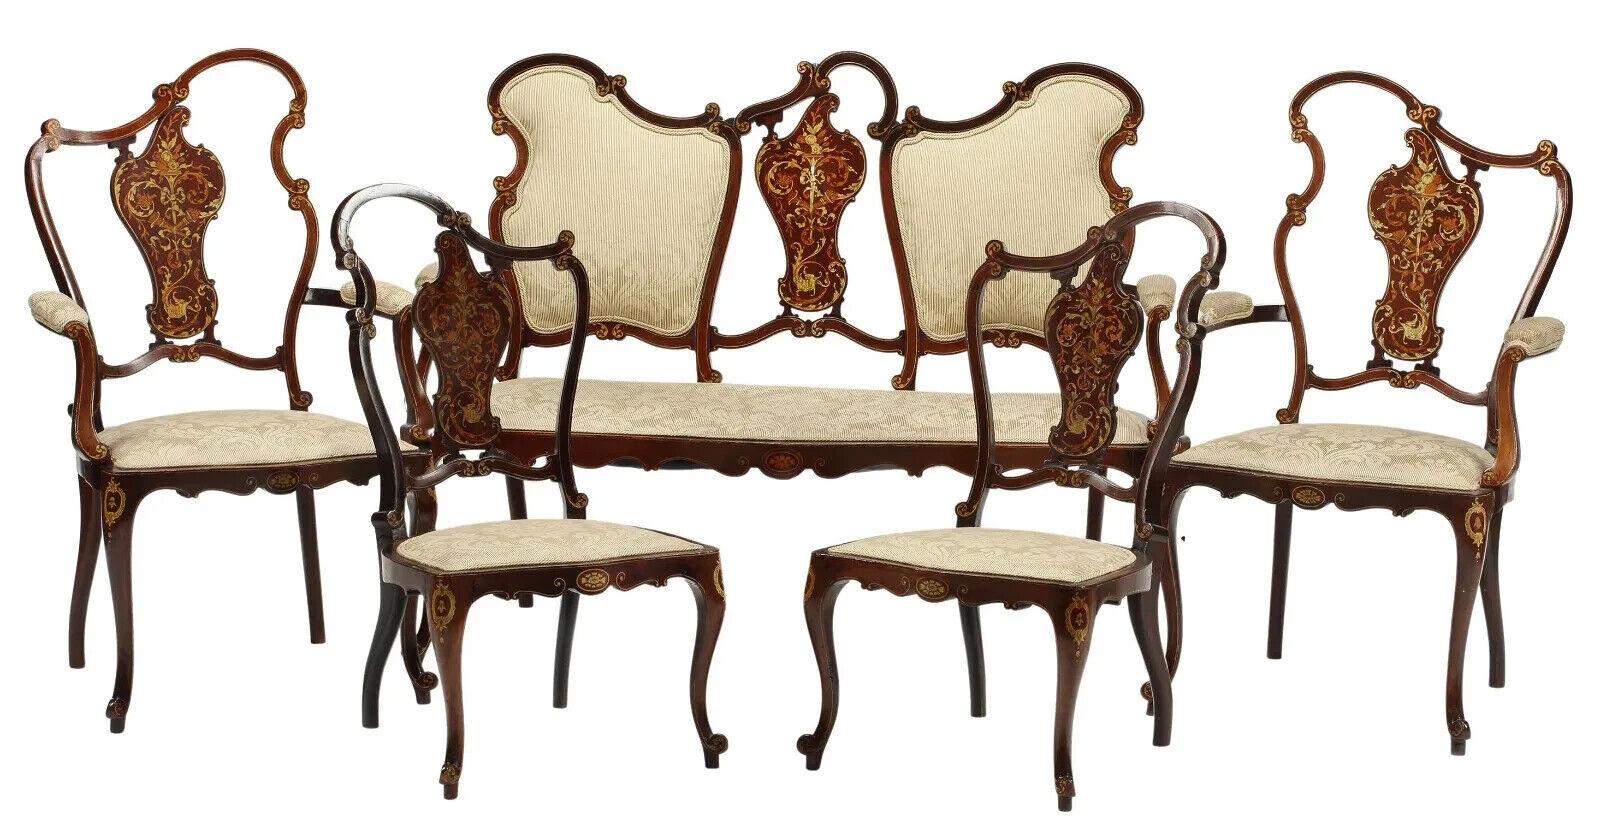 Fabric Antique Salon Set, Austrian, Inlaid, 5-Piece Set, Settee with 4 Chairs!! For Sale